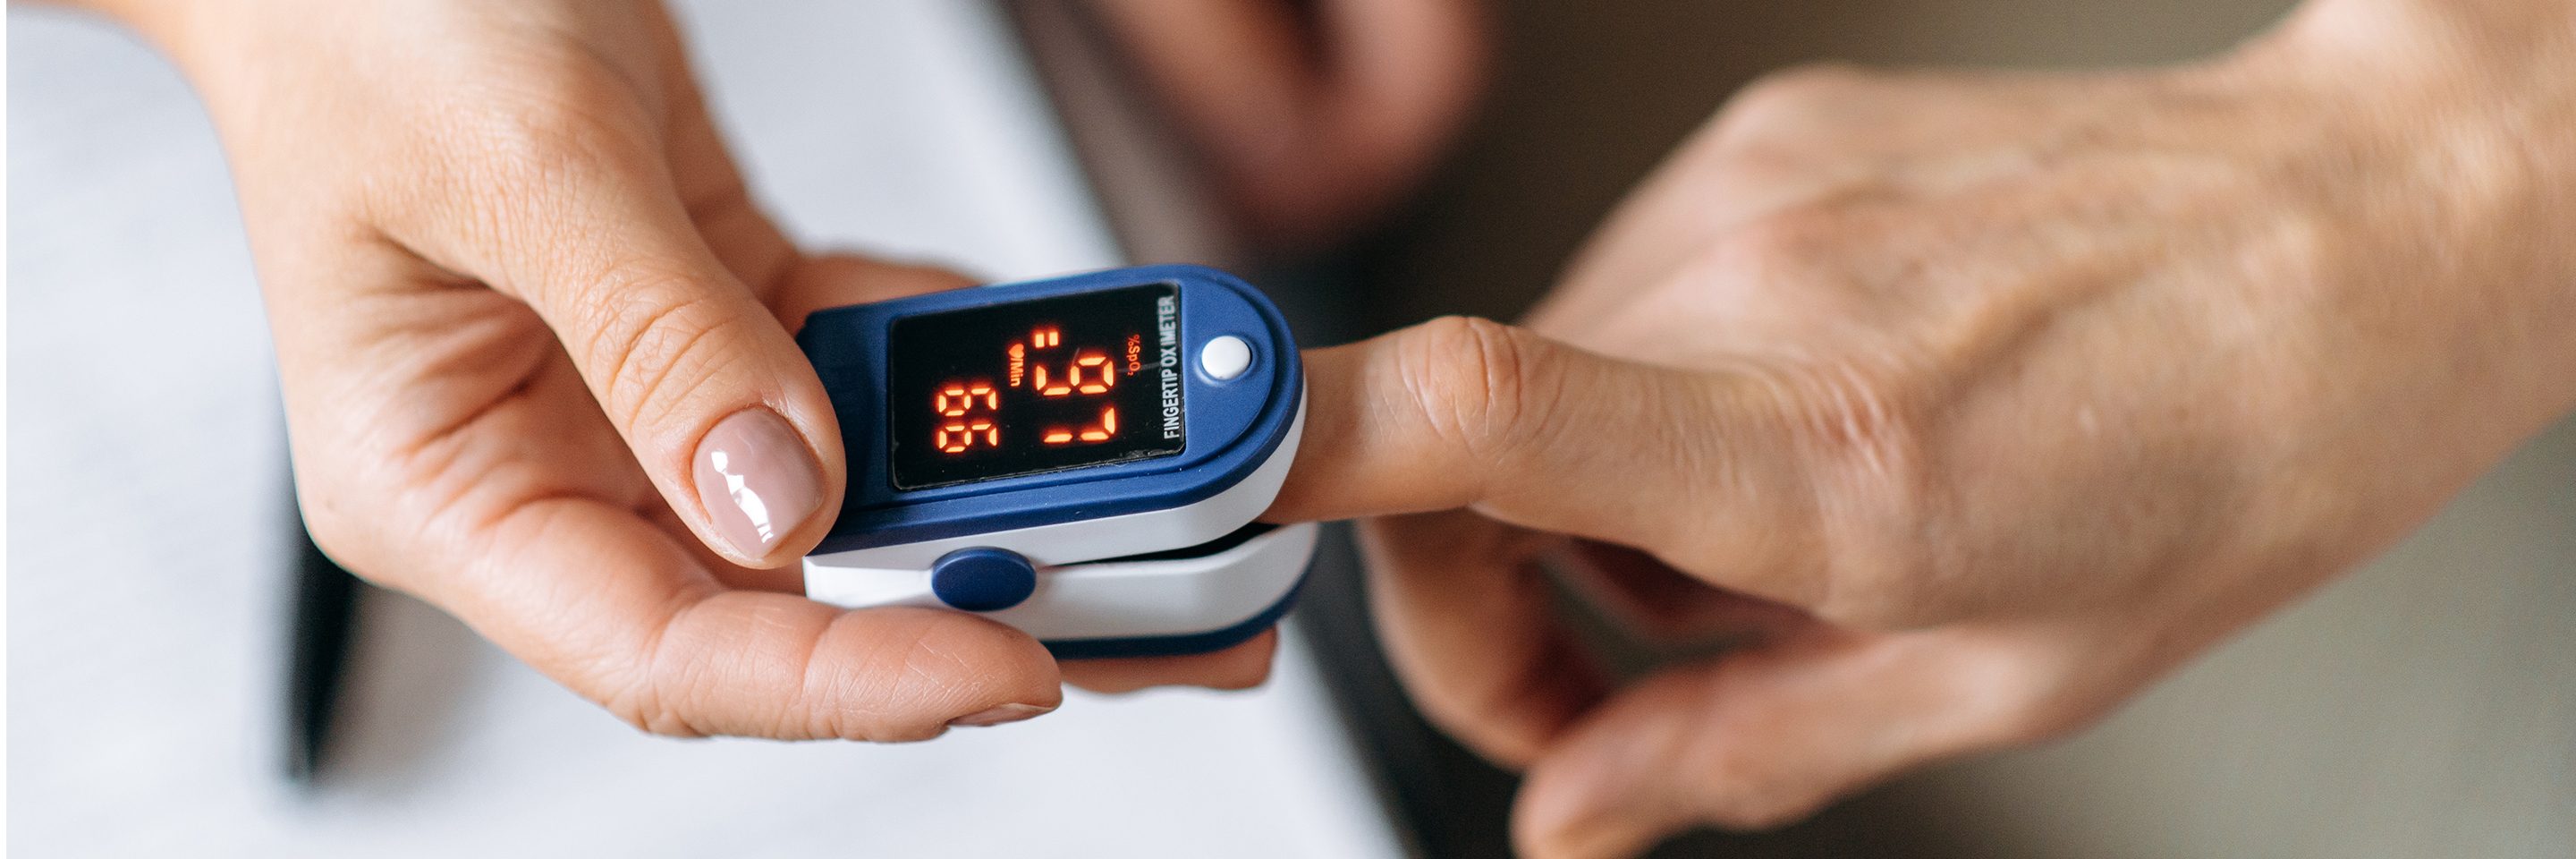 How to Use Pulse Oximeter at Home